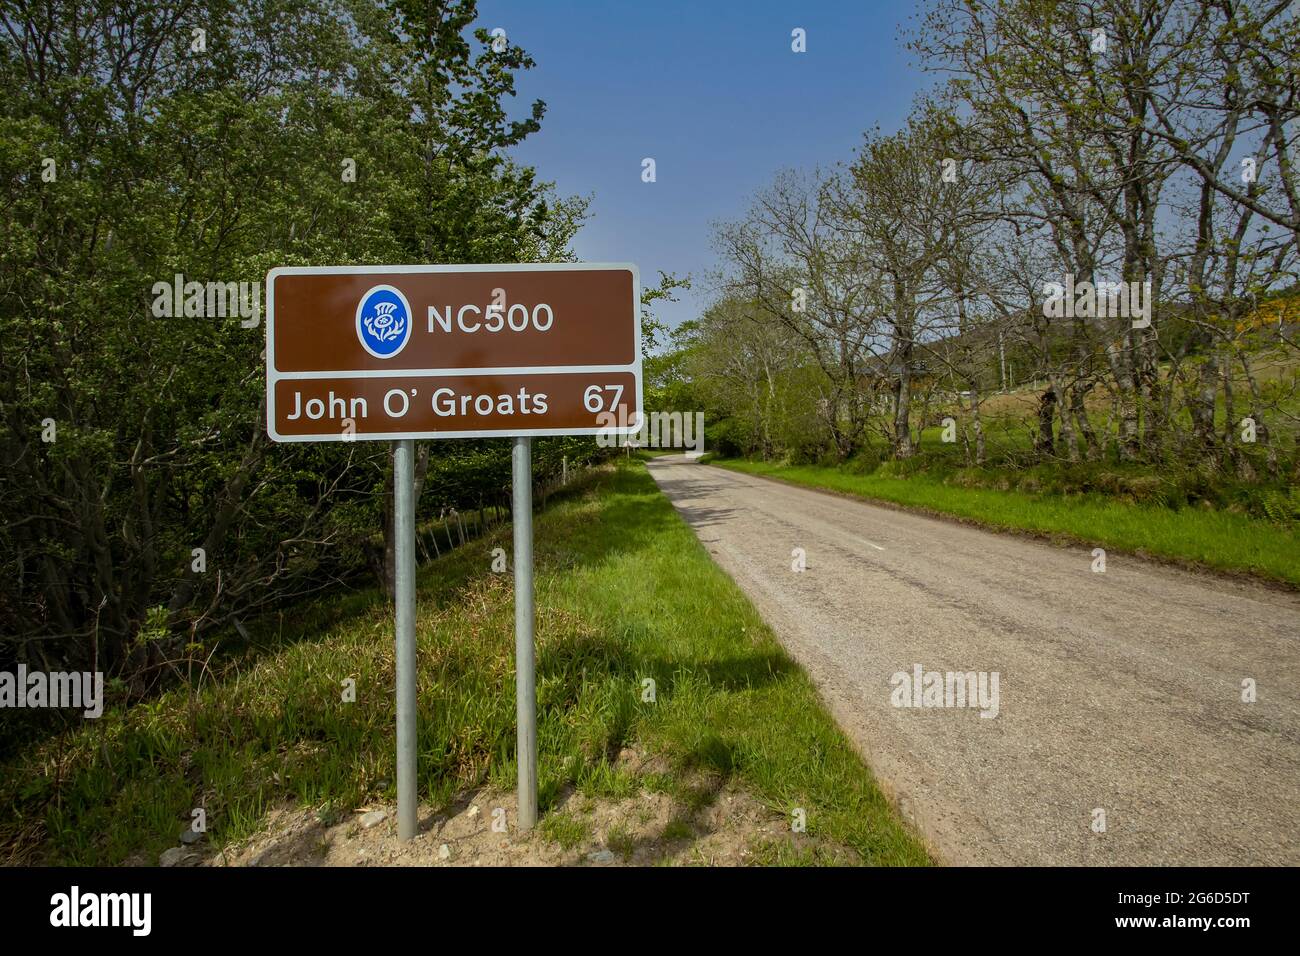 North Coast 500 (NC500) road signs in the Scottish Highlands, UK Stock Photo